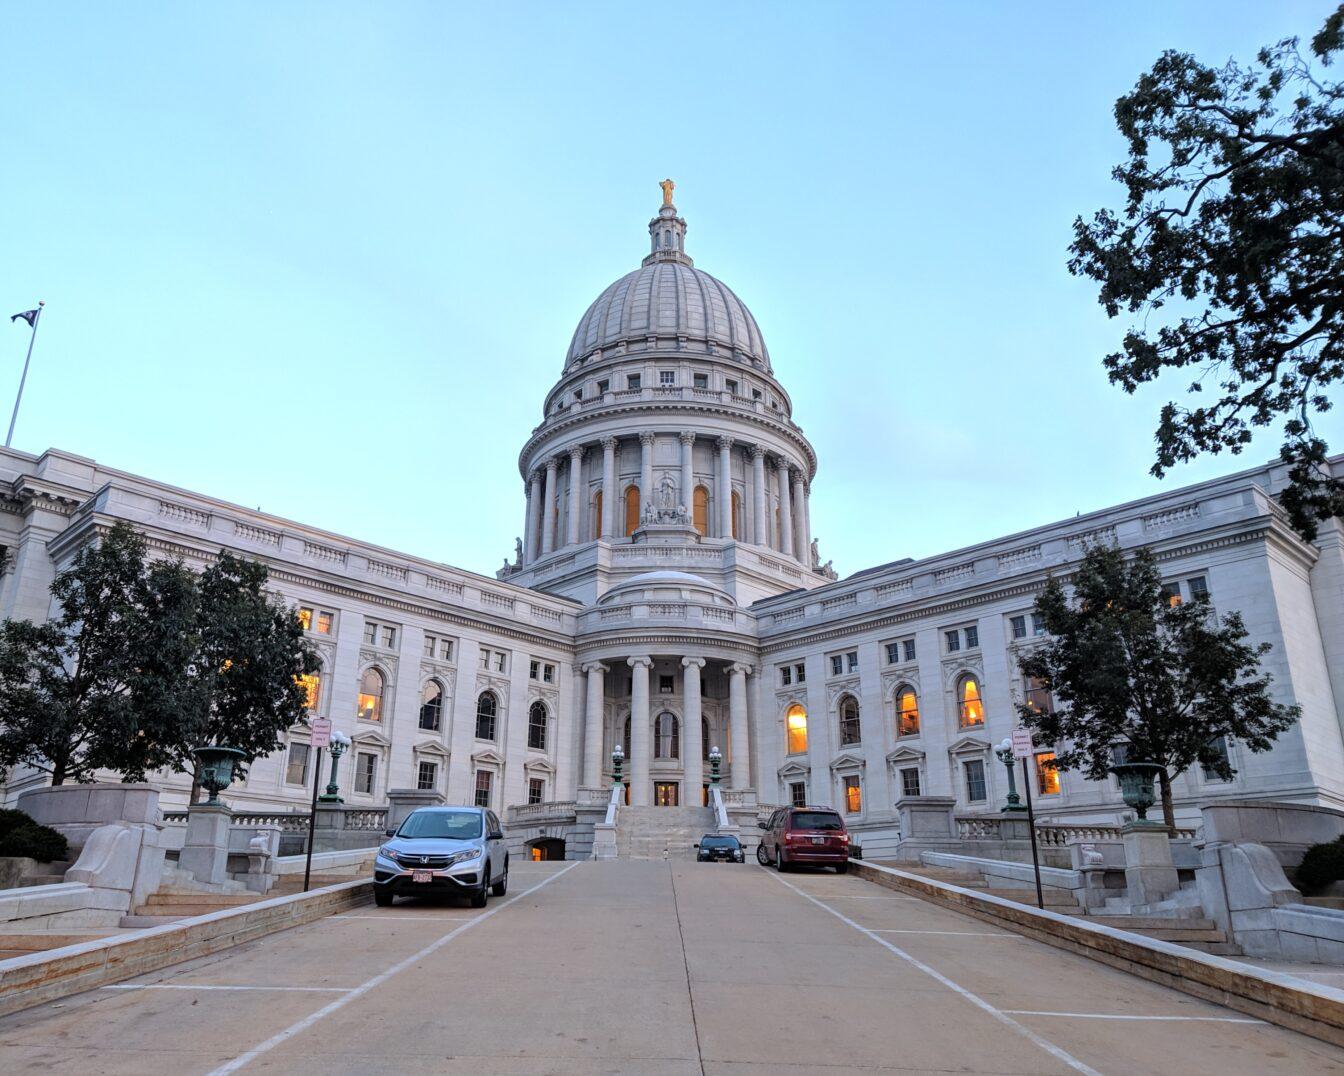 Point-counterpoint: Decison to appoint new Wisconsin secretary of state